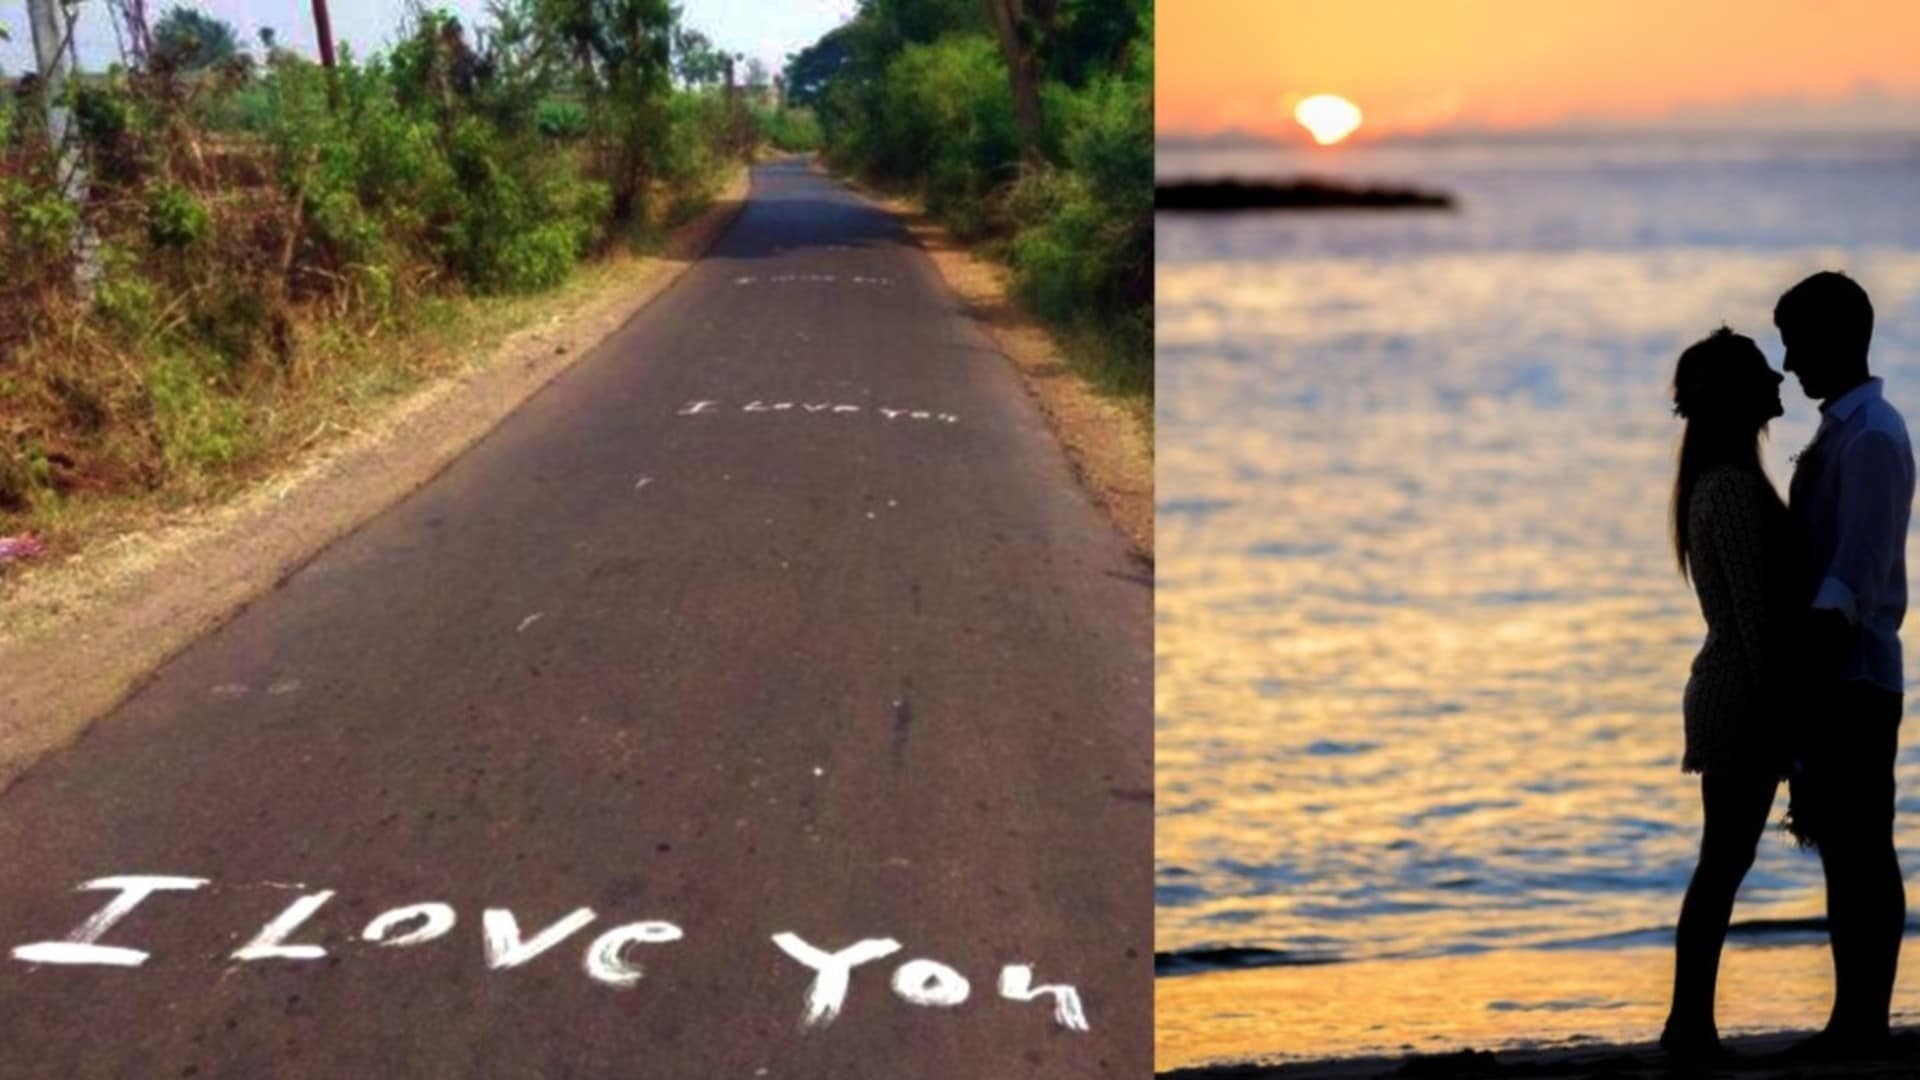 Maharashtra Man Paints 2.5 Km Road With ‘I Love You’, ‘I Miss You’ Messages